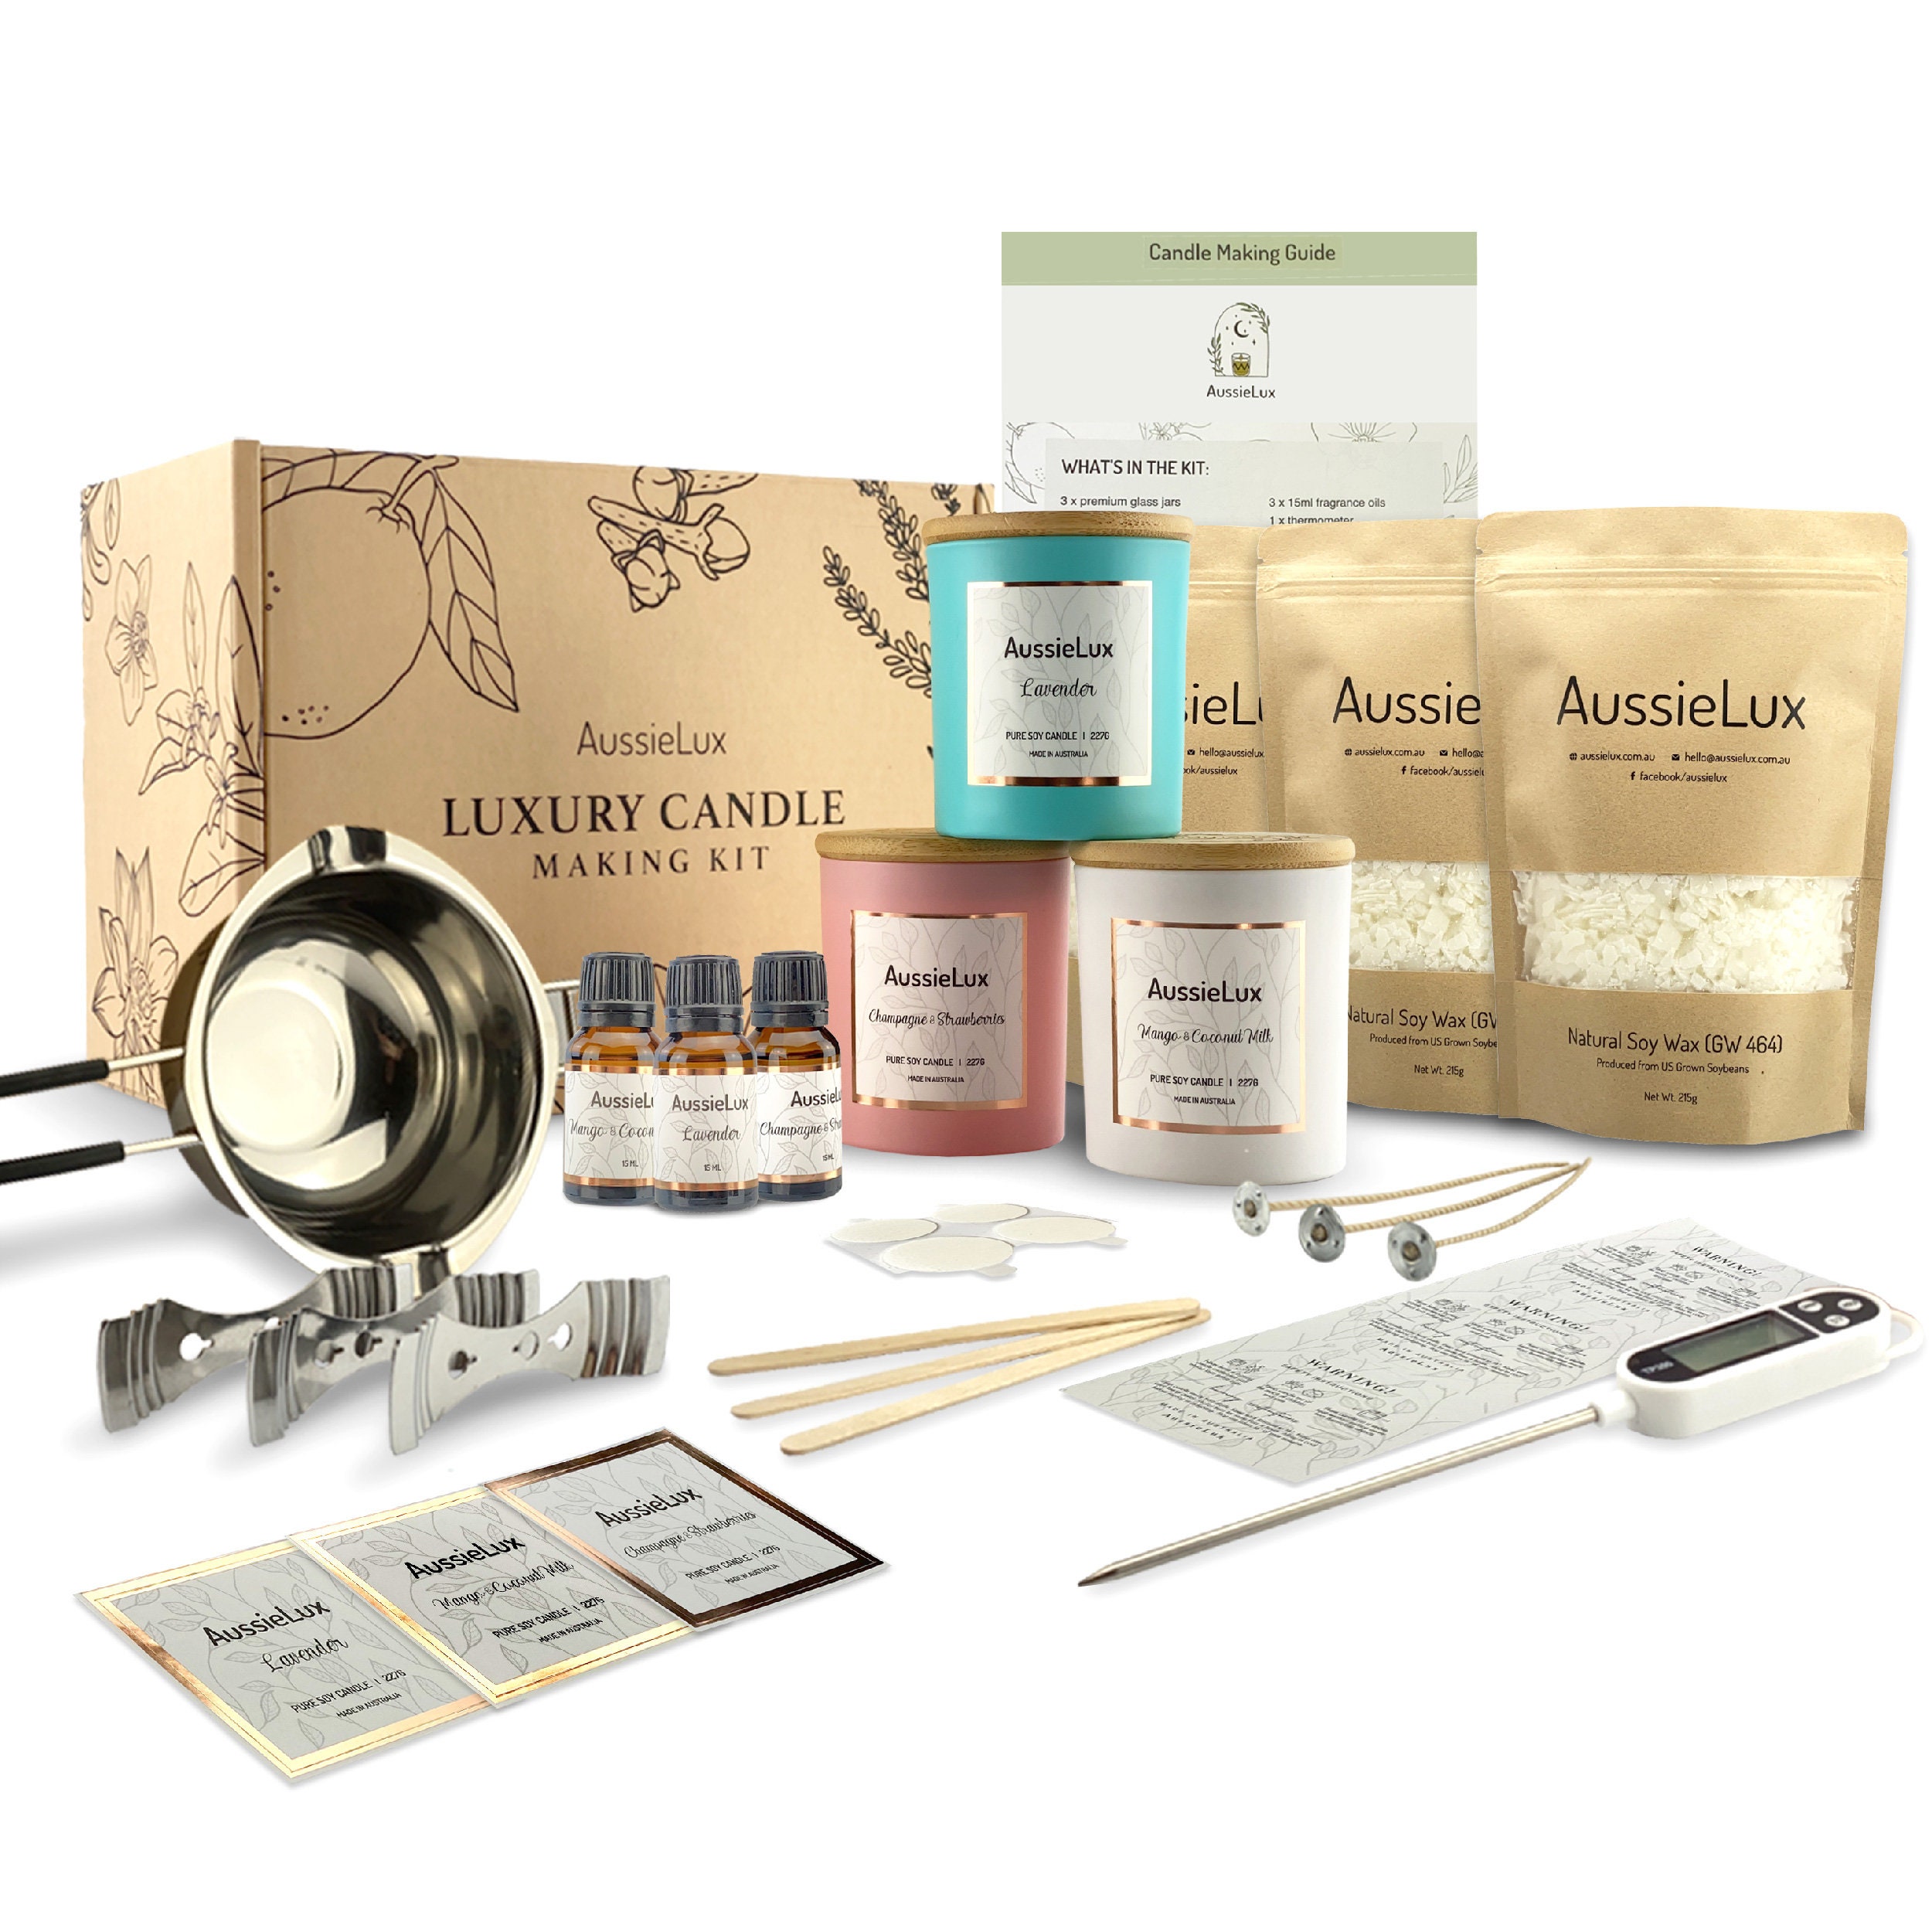 DIY Candle Making Kit, Easy Candle Making, Candle DIY Kit, Craft Kits for  Adults, Girls Night, Virtual Event Company Gift 